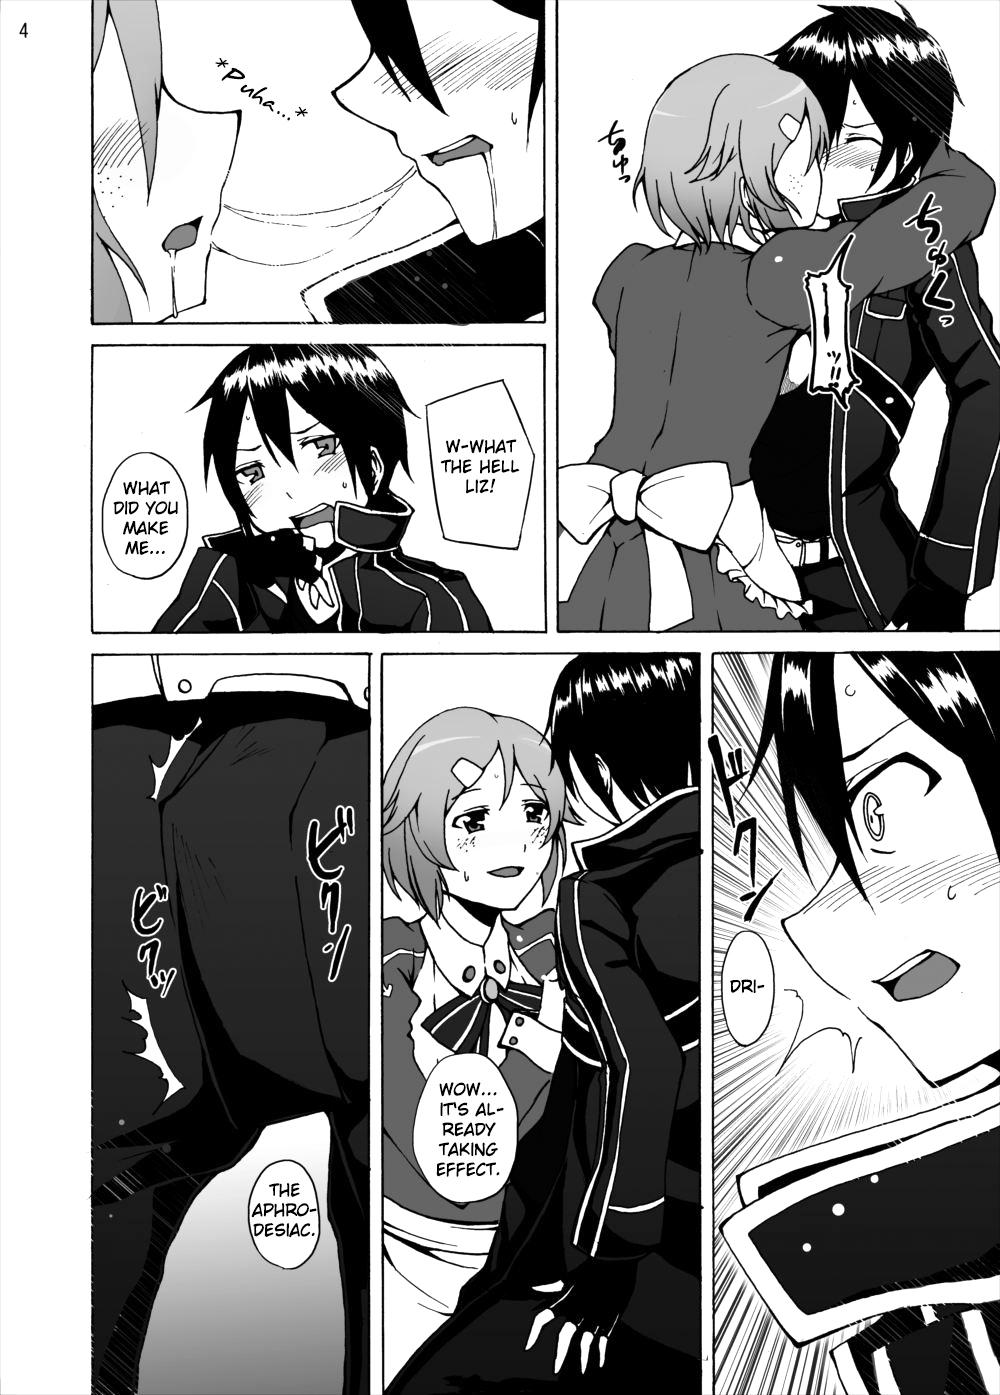 Mama Lisbeth's Decision...To Steal Kirito From Asuna Even if She Has to Use a Dangerous Drug - Sword art online Oldyoung - Page 4